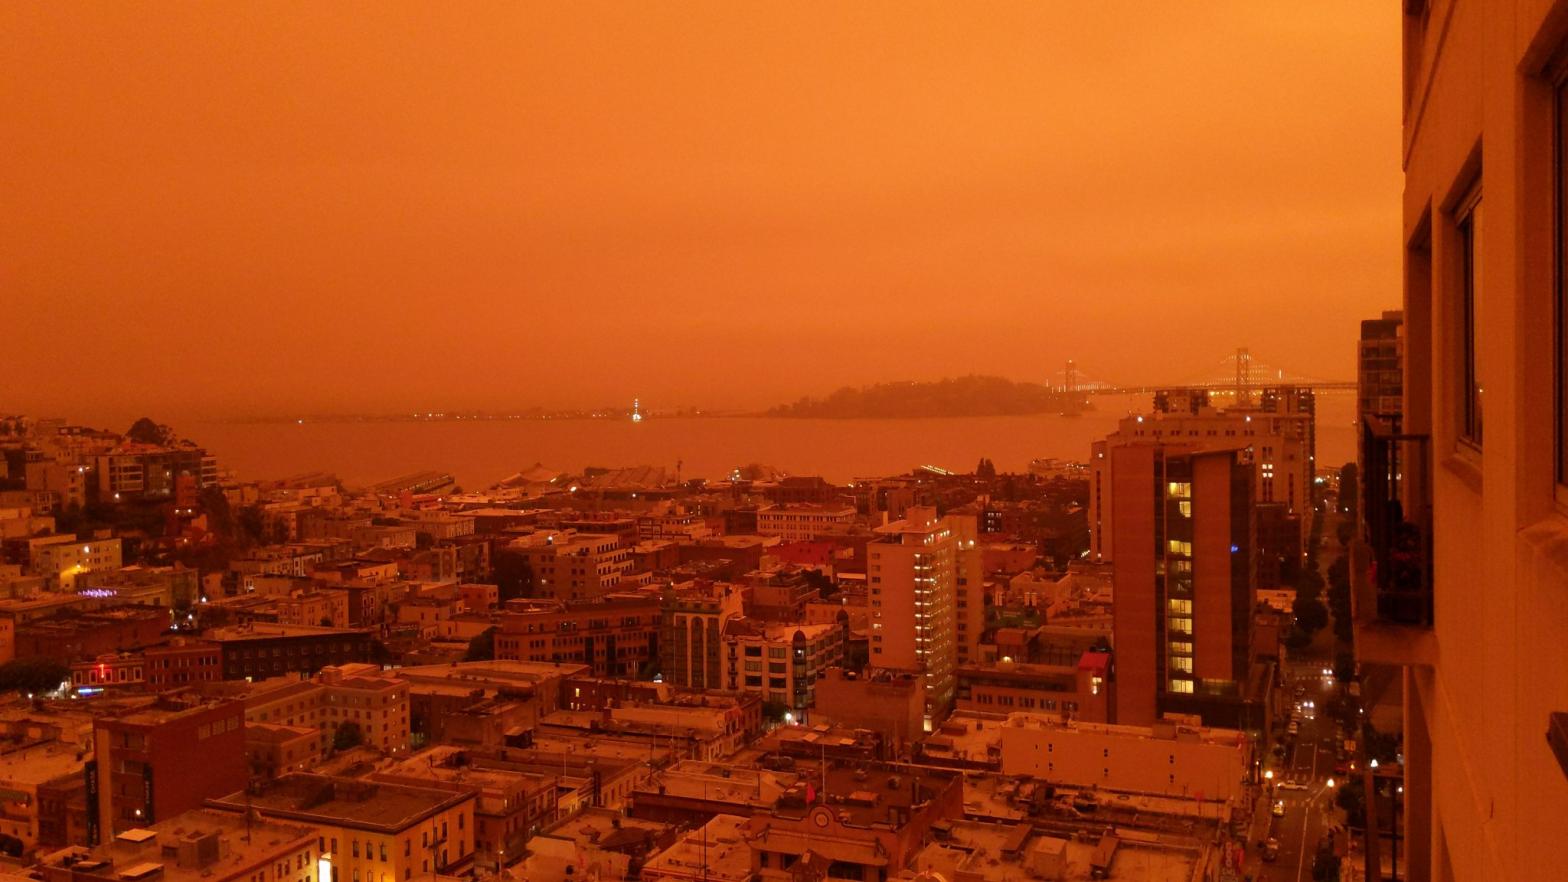 Unprecedented Fires Are Turning San Francisco Into Literal Hell & It's Started Raining Ash